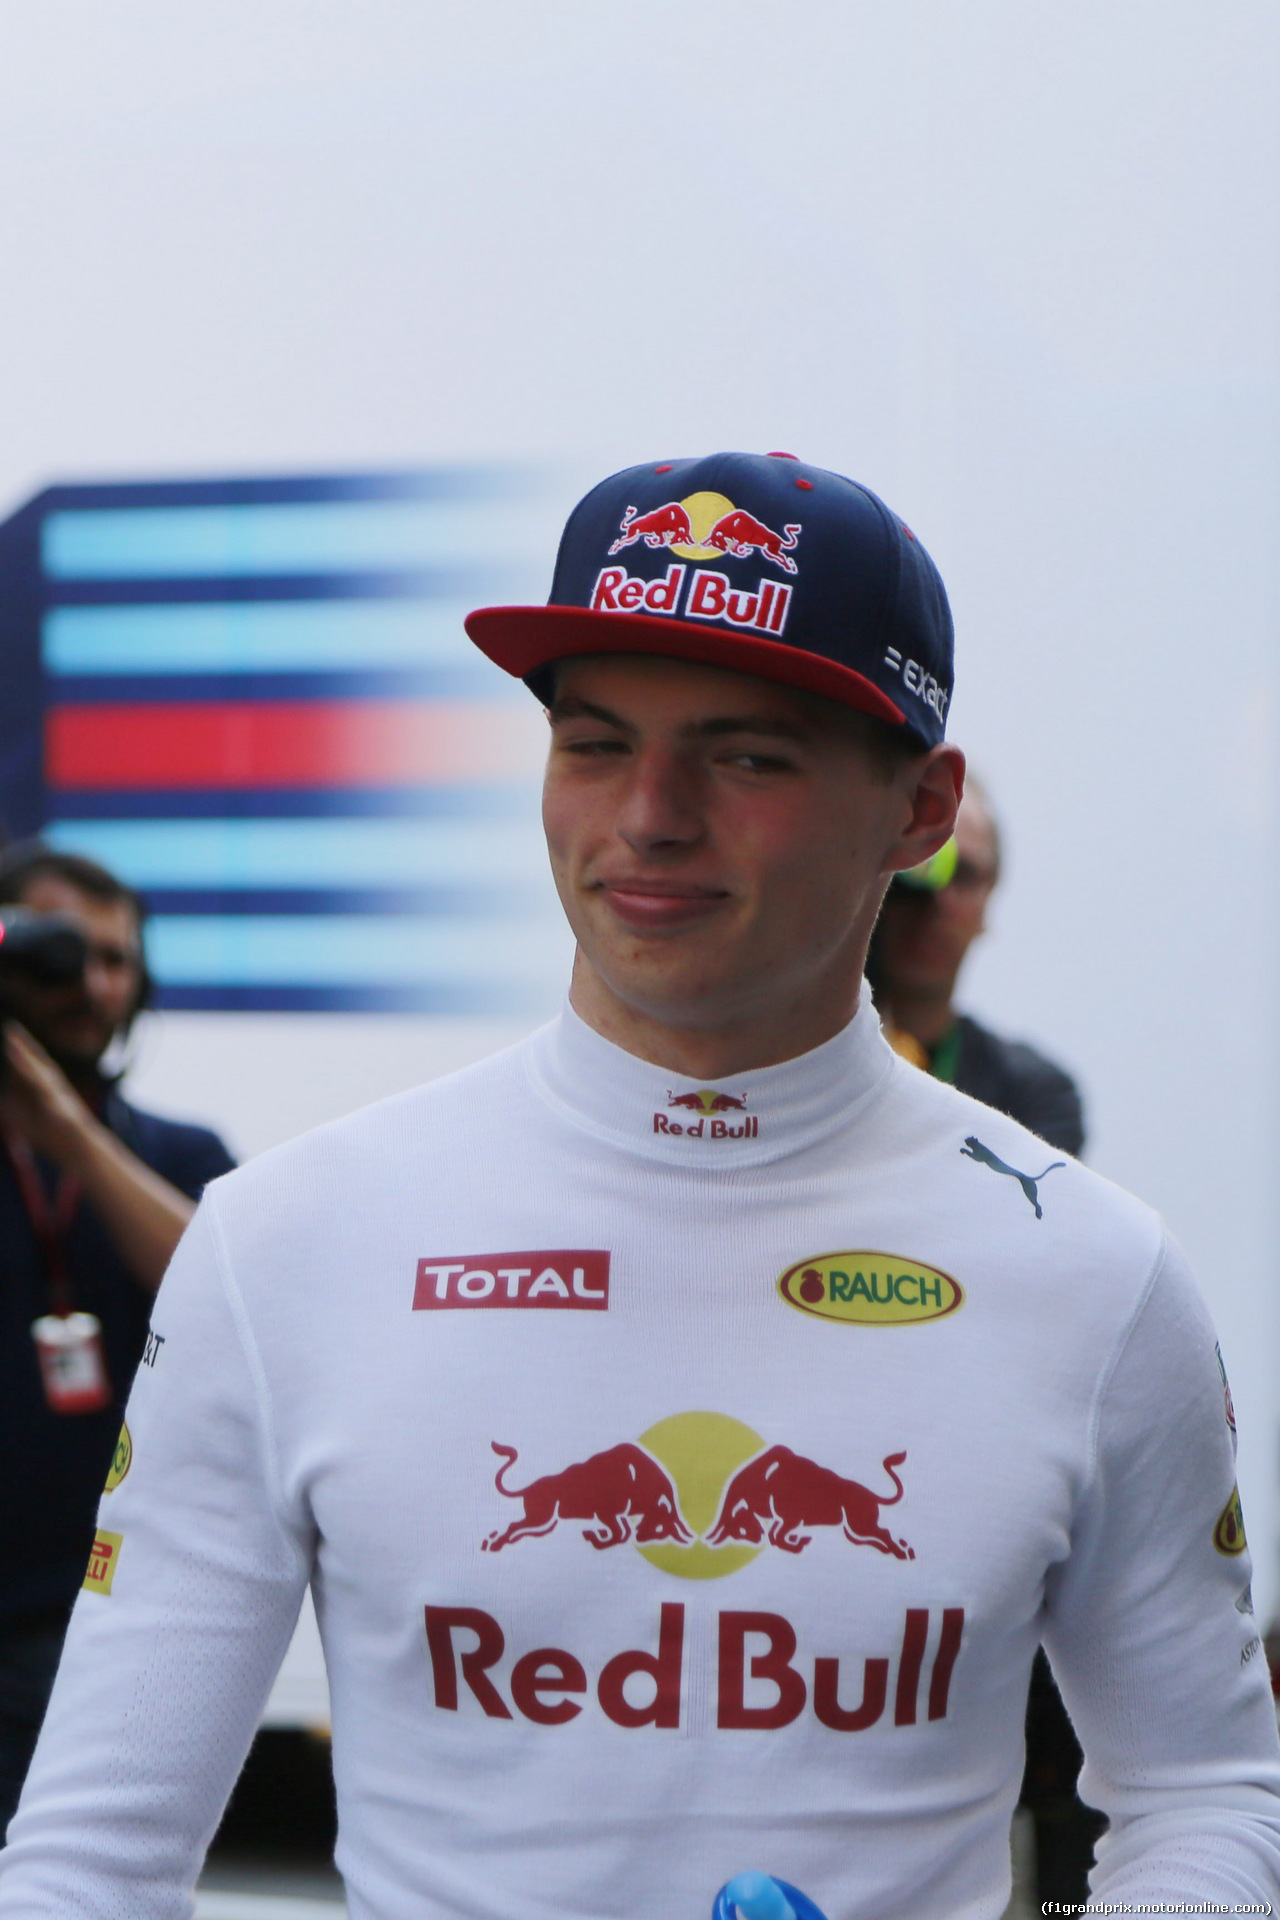 GP SPAGNA, 14.05.2016 - Prove Libere 3, Max Verstappen (NED) Red Bull Racing RB12